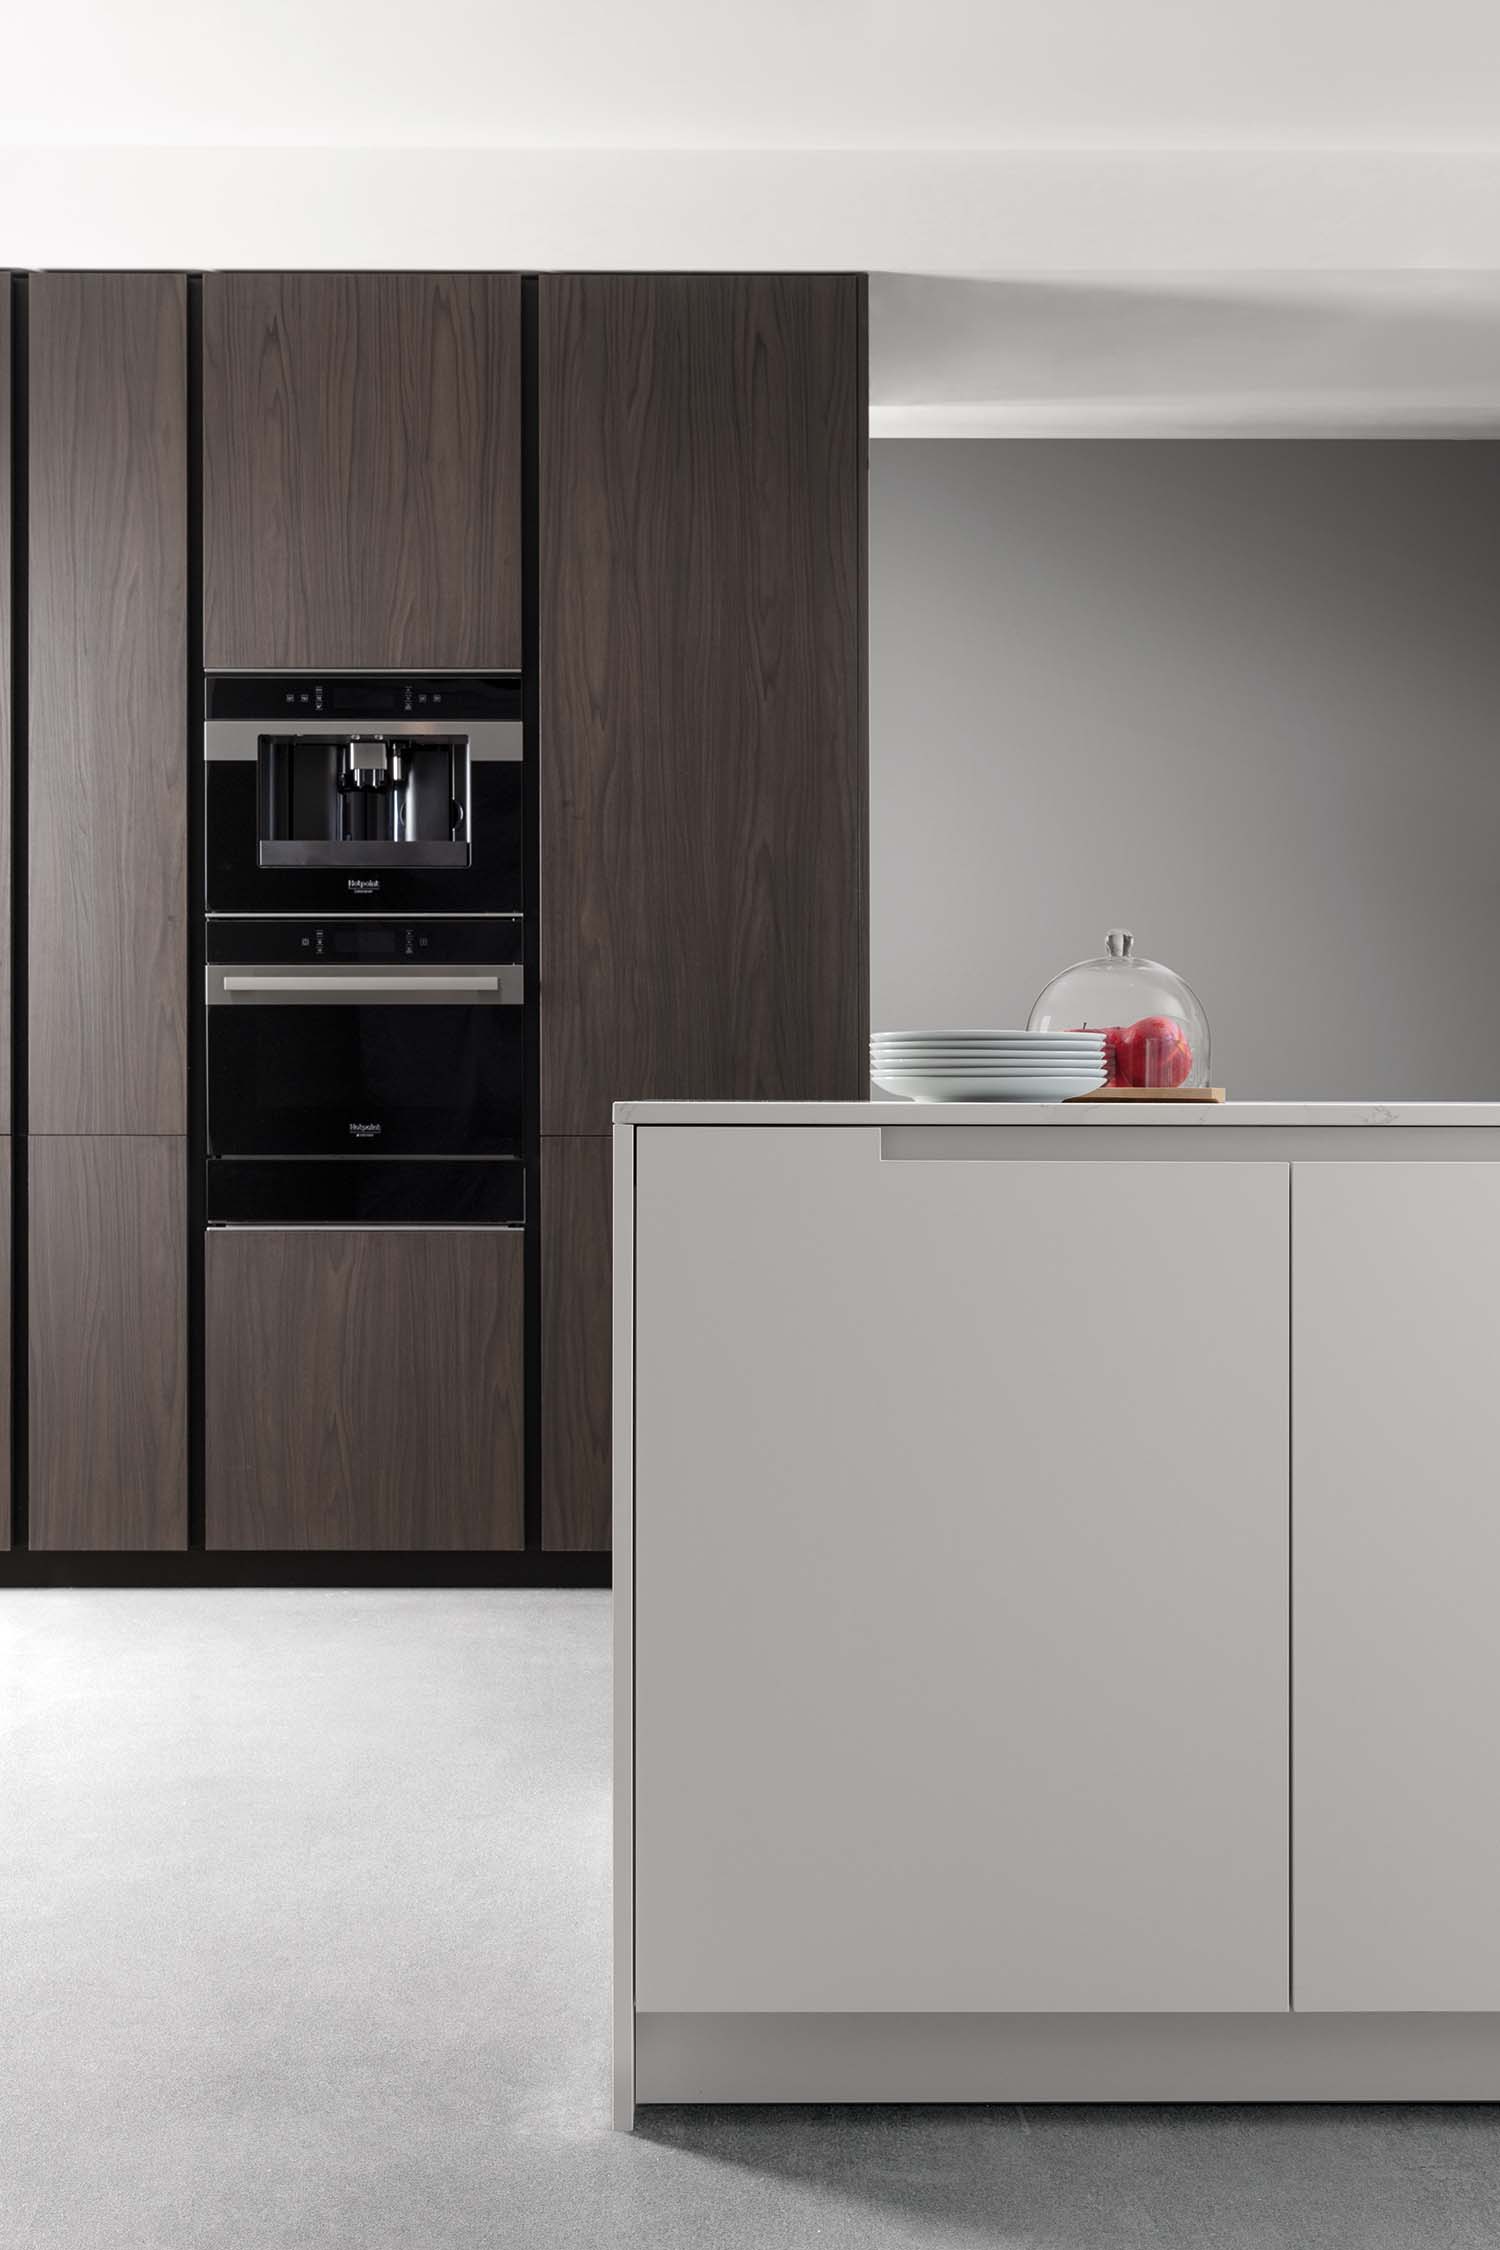 Unique detailed shape door groove that stimulates a long notched handle on the base units of the kitchen island